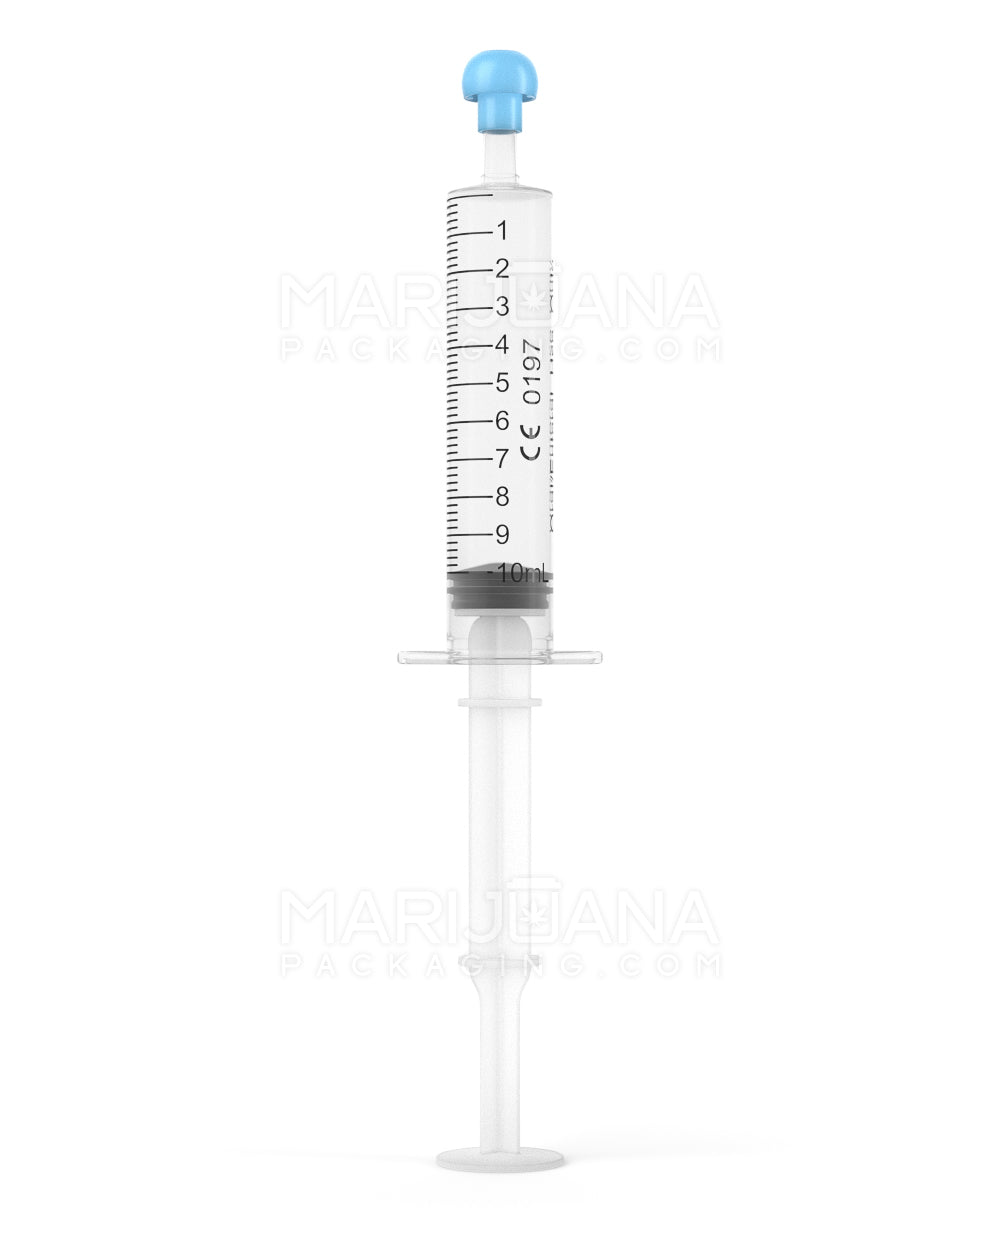 Plastic Oral Concentrate Syringes | 10mL - 1mL Increments | Sample - 1